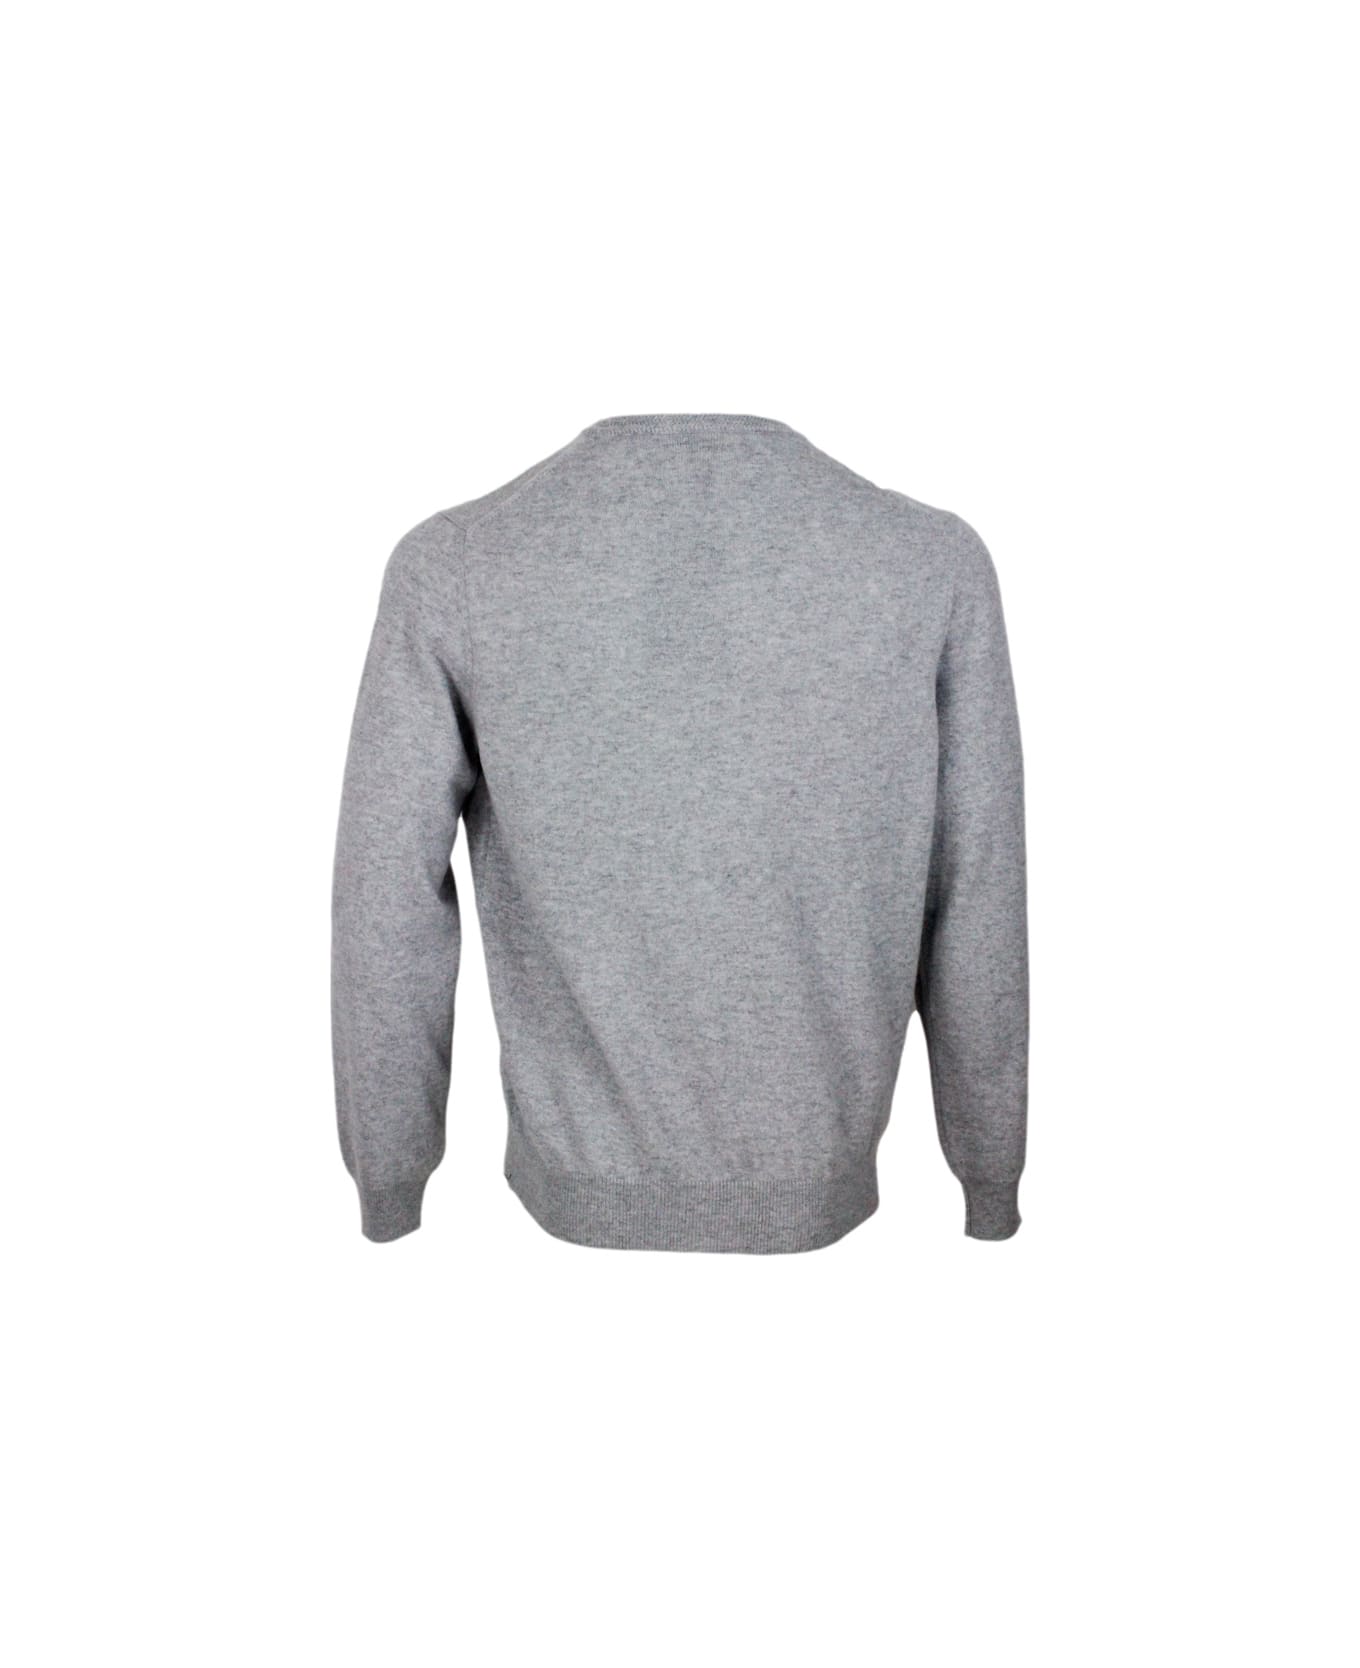 Colombo Long-sleeved V-neck Sweater In Fine 2-ply 100% Kid Cashmere With Special Processing On The Edge Of The Neck - Grey ニットウェア